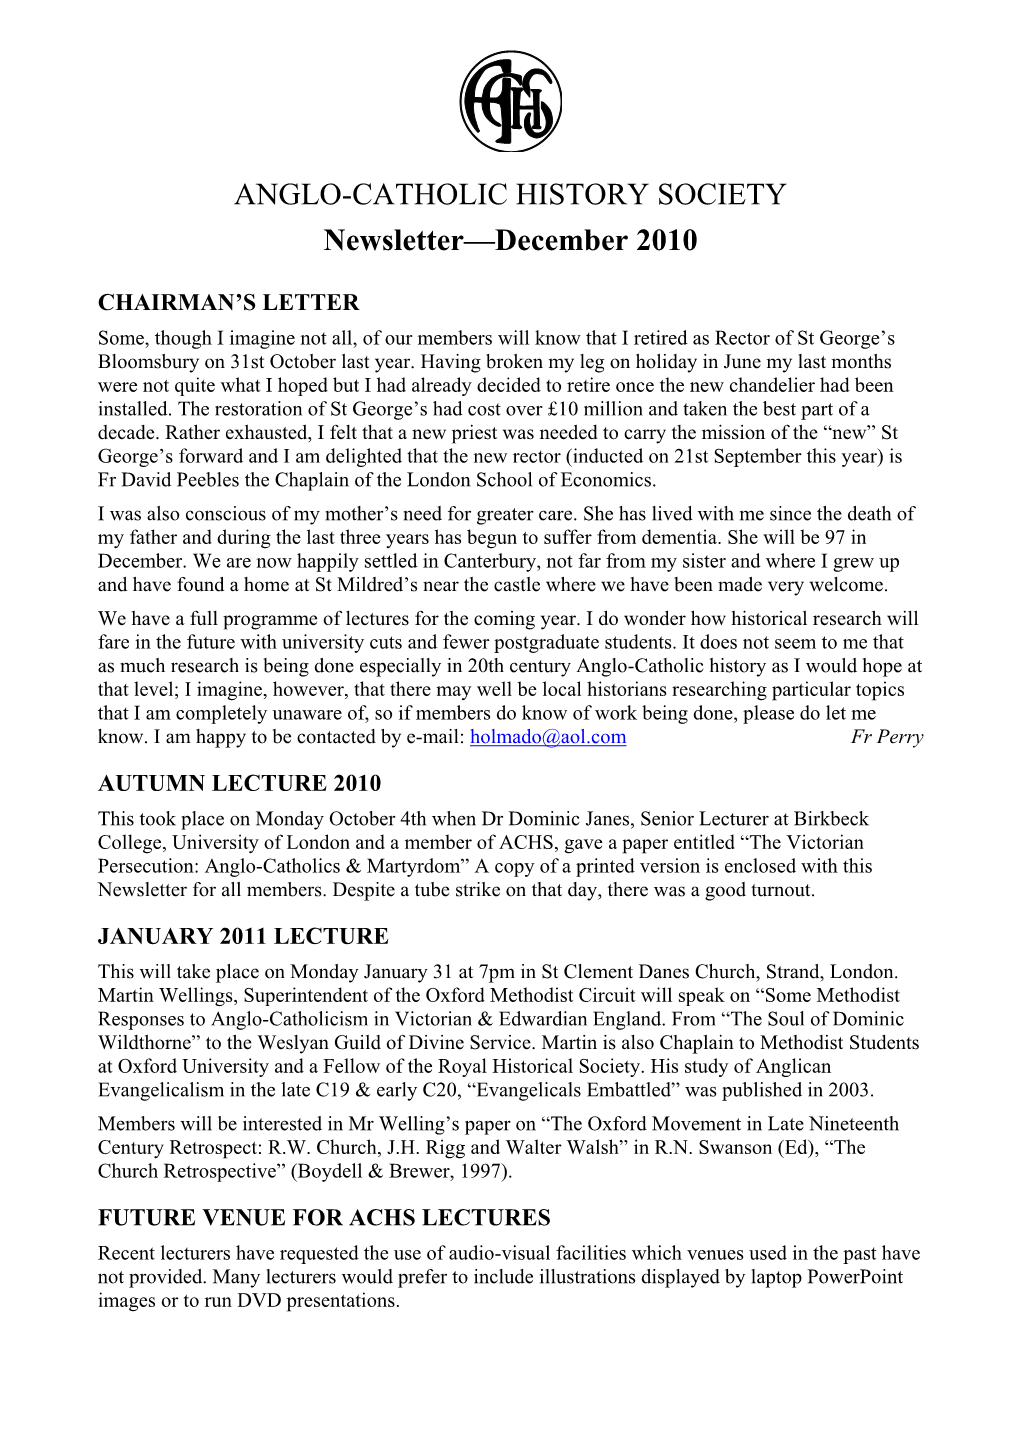 ANGLO-CATHOLIC HISTORY SOCIETY Newsletter—December 2010